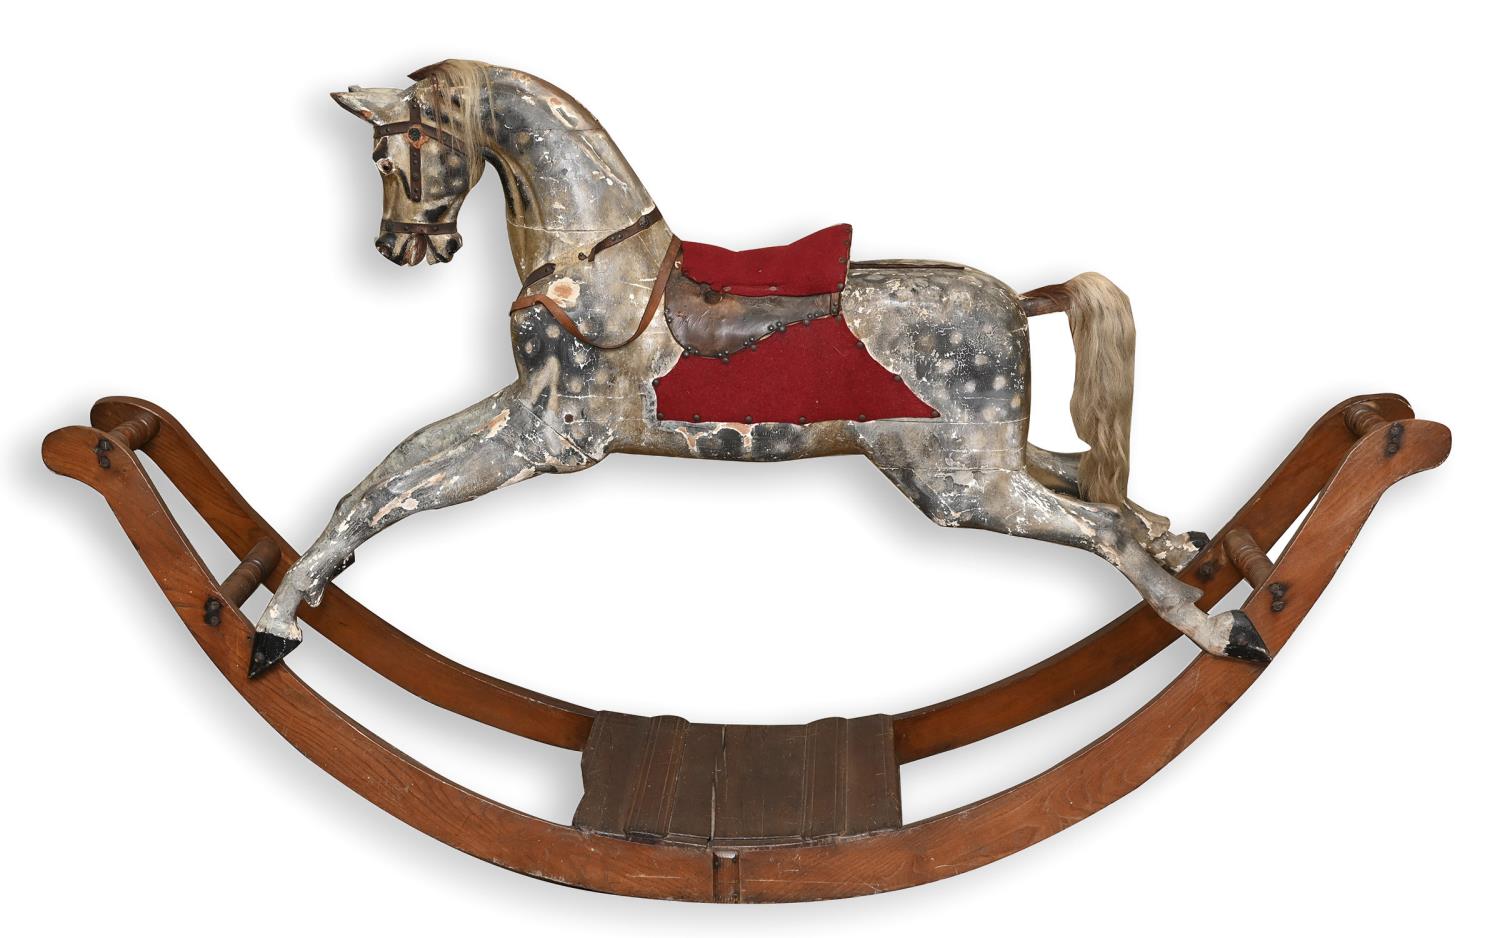 LARGE VICTORIAN ROCKING HORSE possibly by G & J Lines or Ayres, a large painted wooden rocking